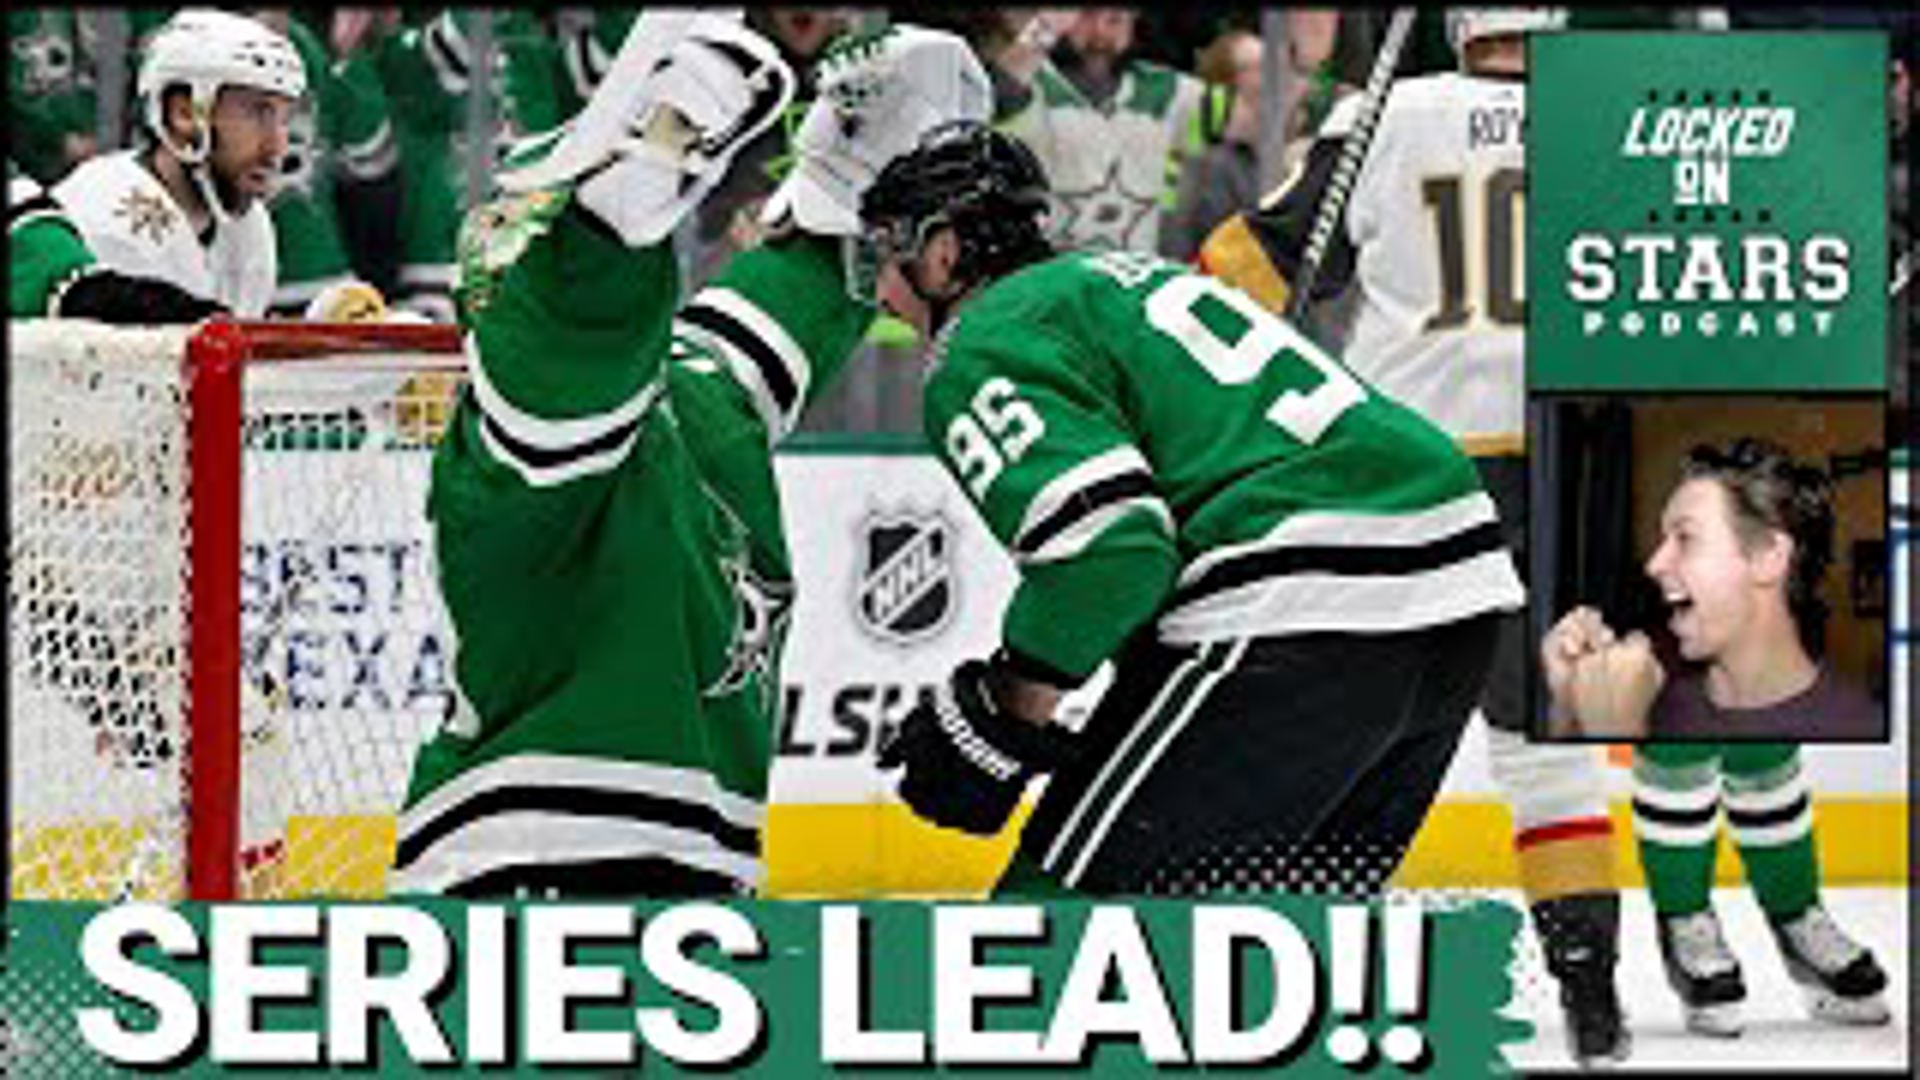 The Dallas Stars are the first home team in the series to win, as they take down the Vegas Golden Knights by a final score of 3-2 in game five.